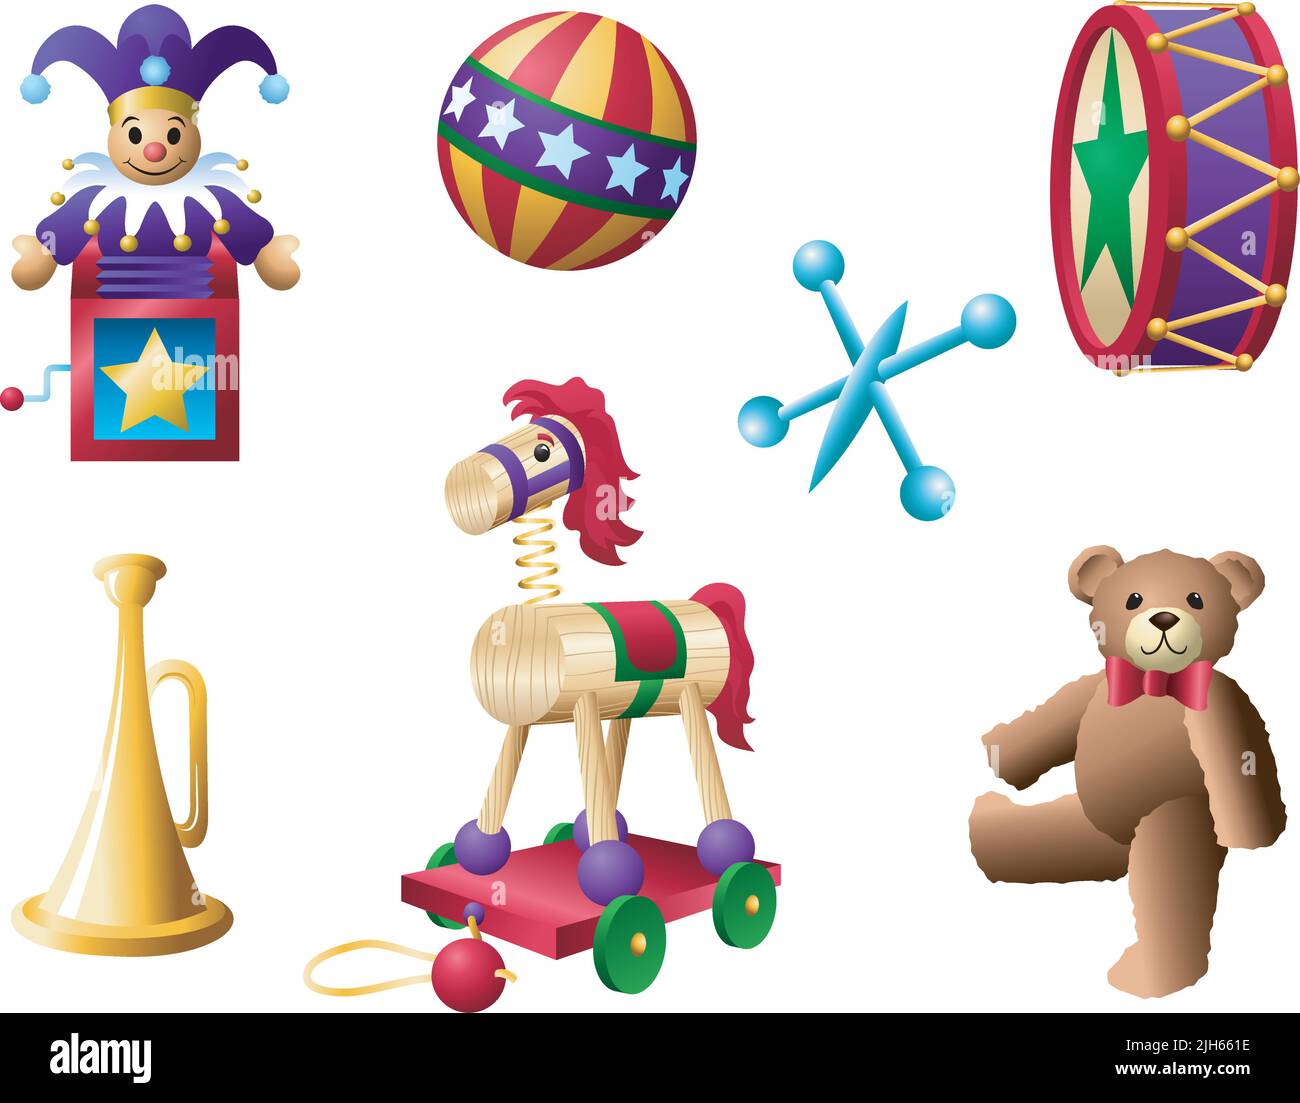 A set of vector illustrations of classic Christmas toys. Stock Vector